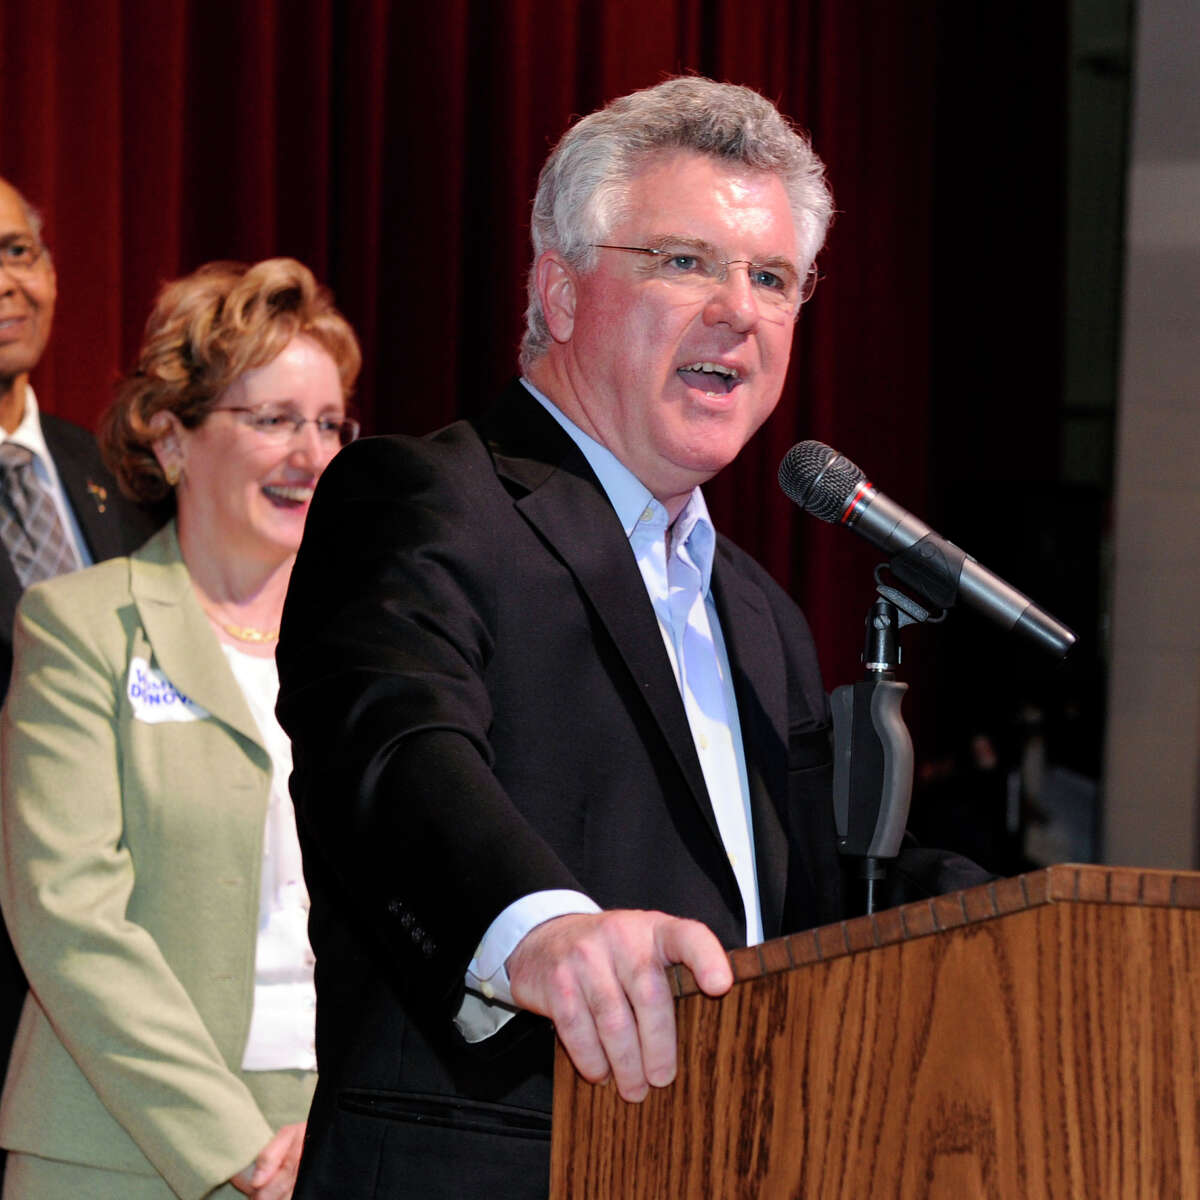 House Speaker Christopher Donovan, D-Meriden, with wife Niki, left, accepts the party's endorsement in the race for the 5th Congressional District during Monday's convention in Waterbury.